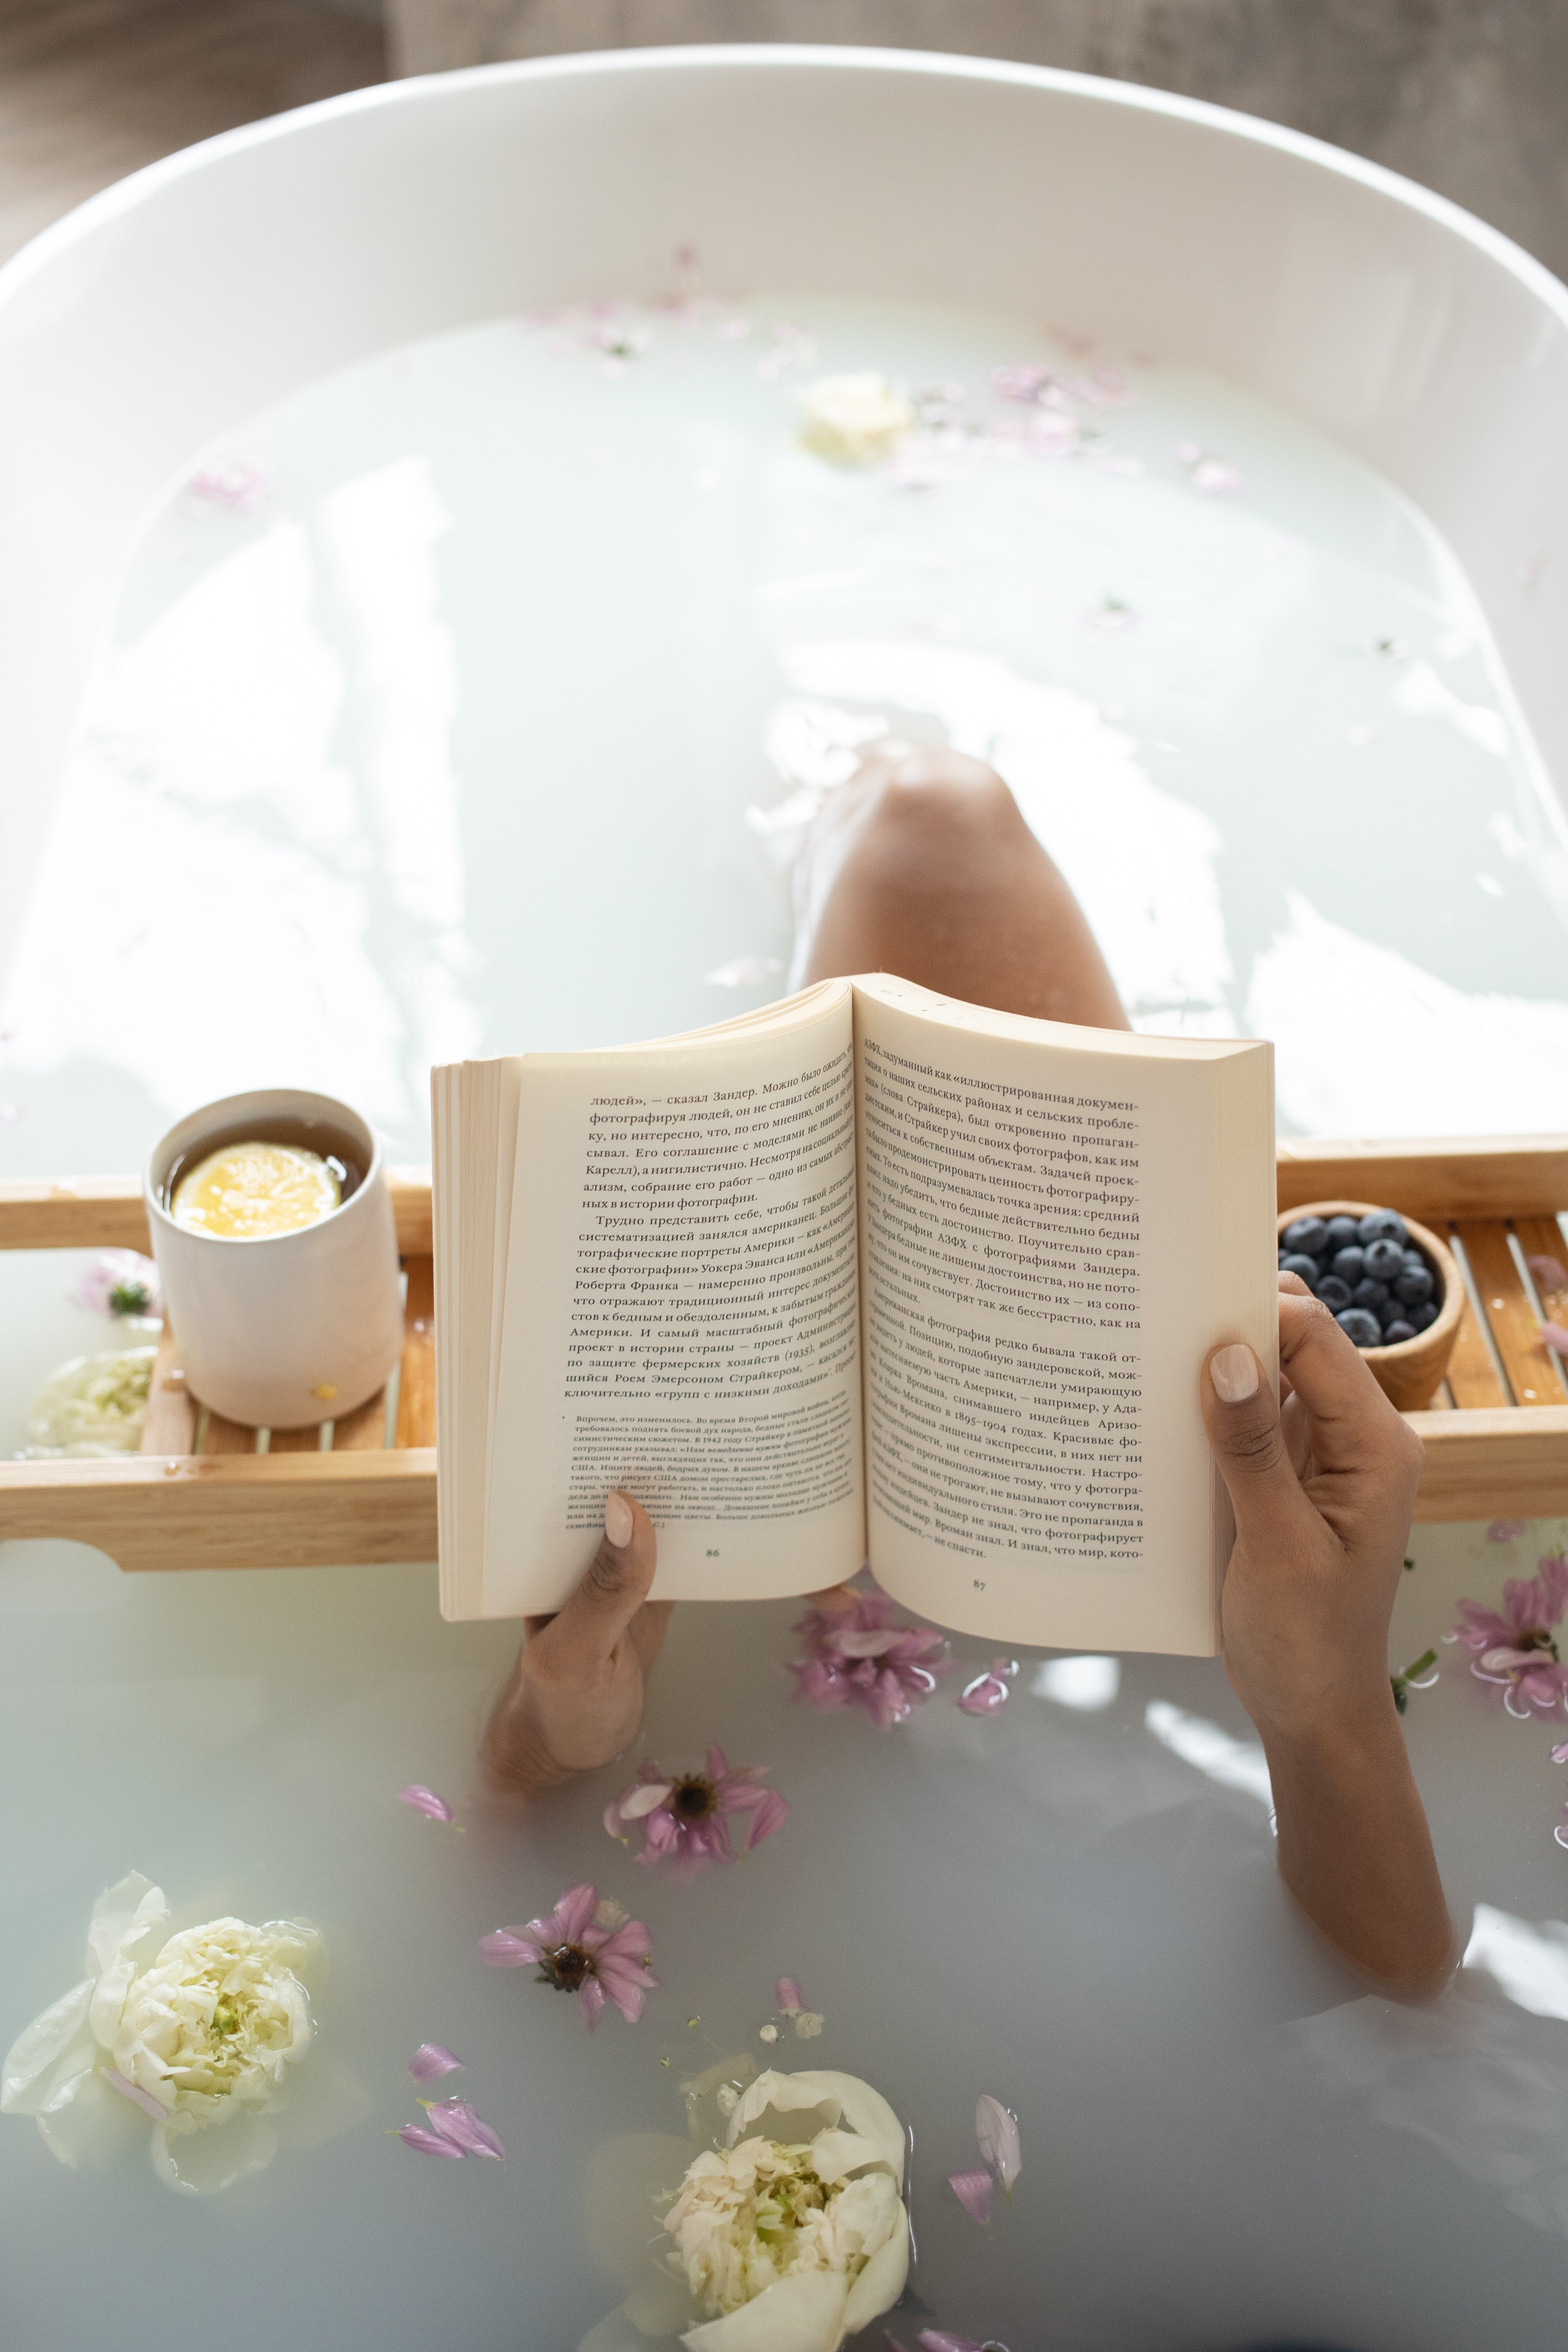 A woman reading in the bath. | Source: Pexels